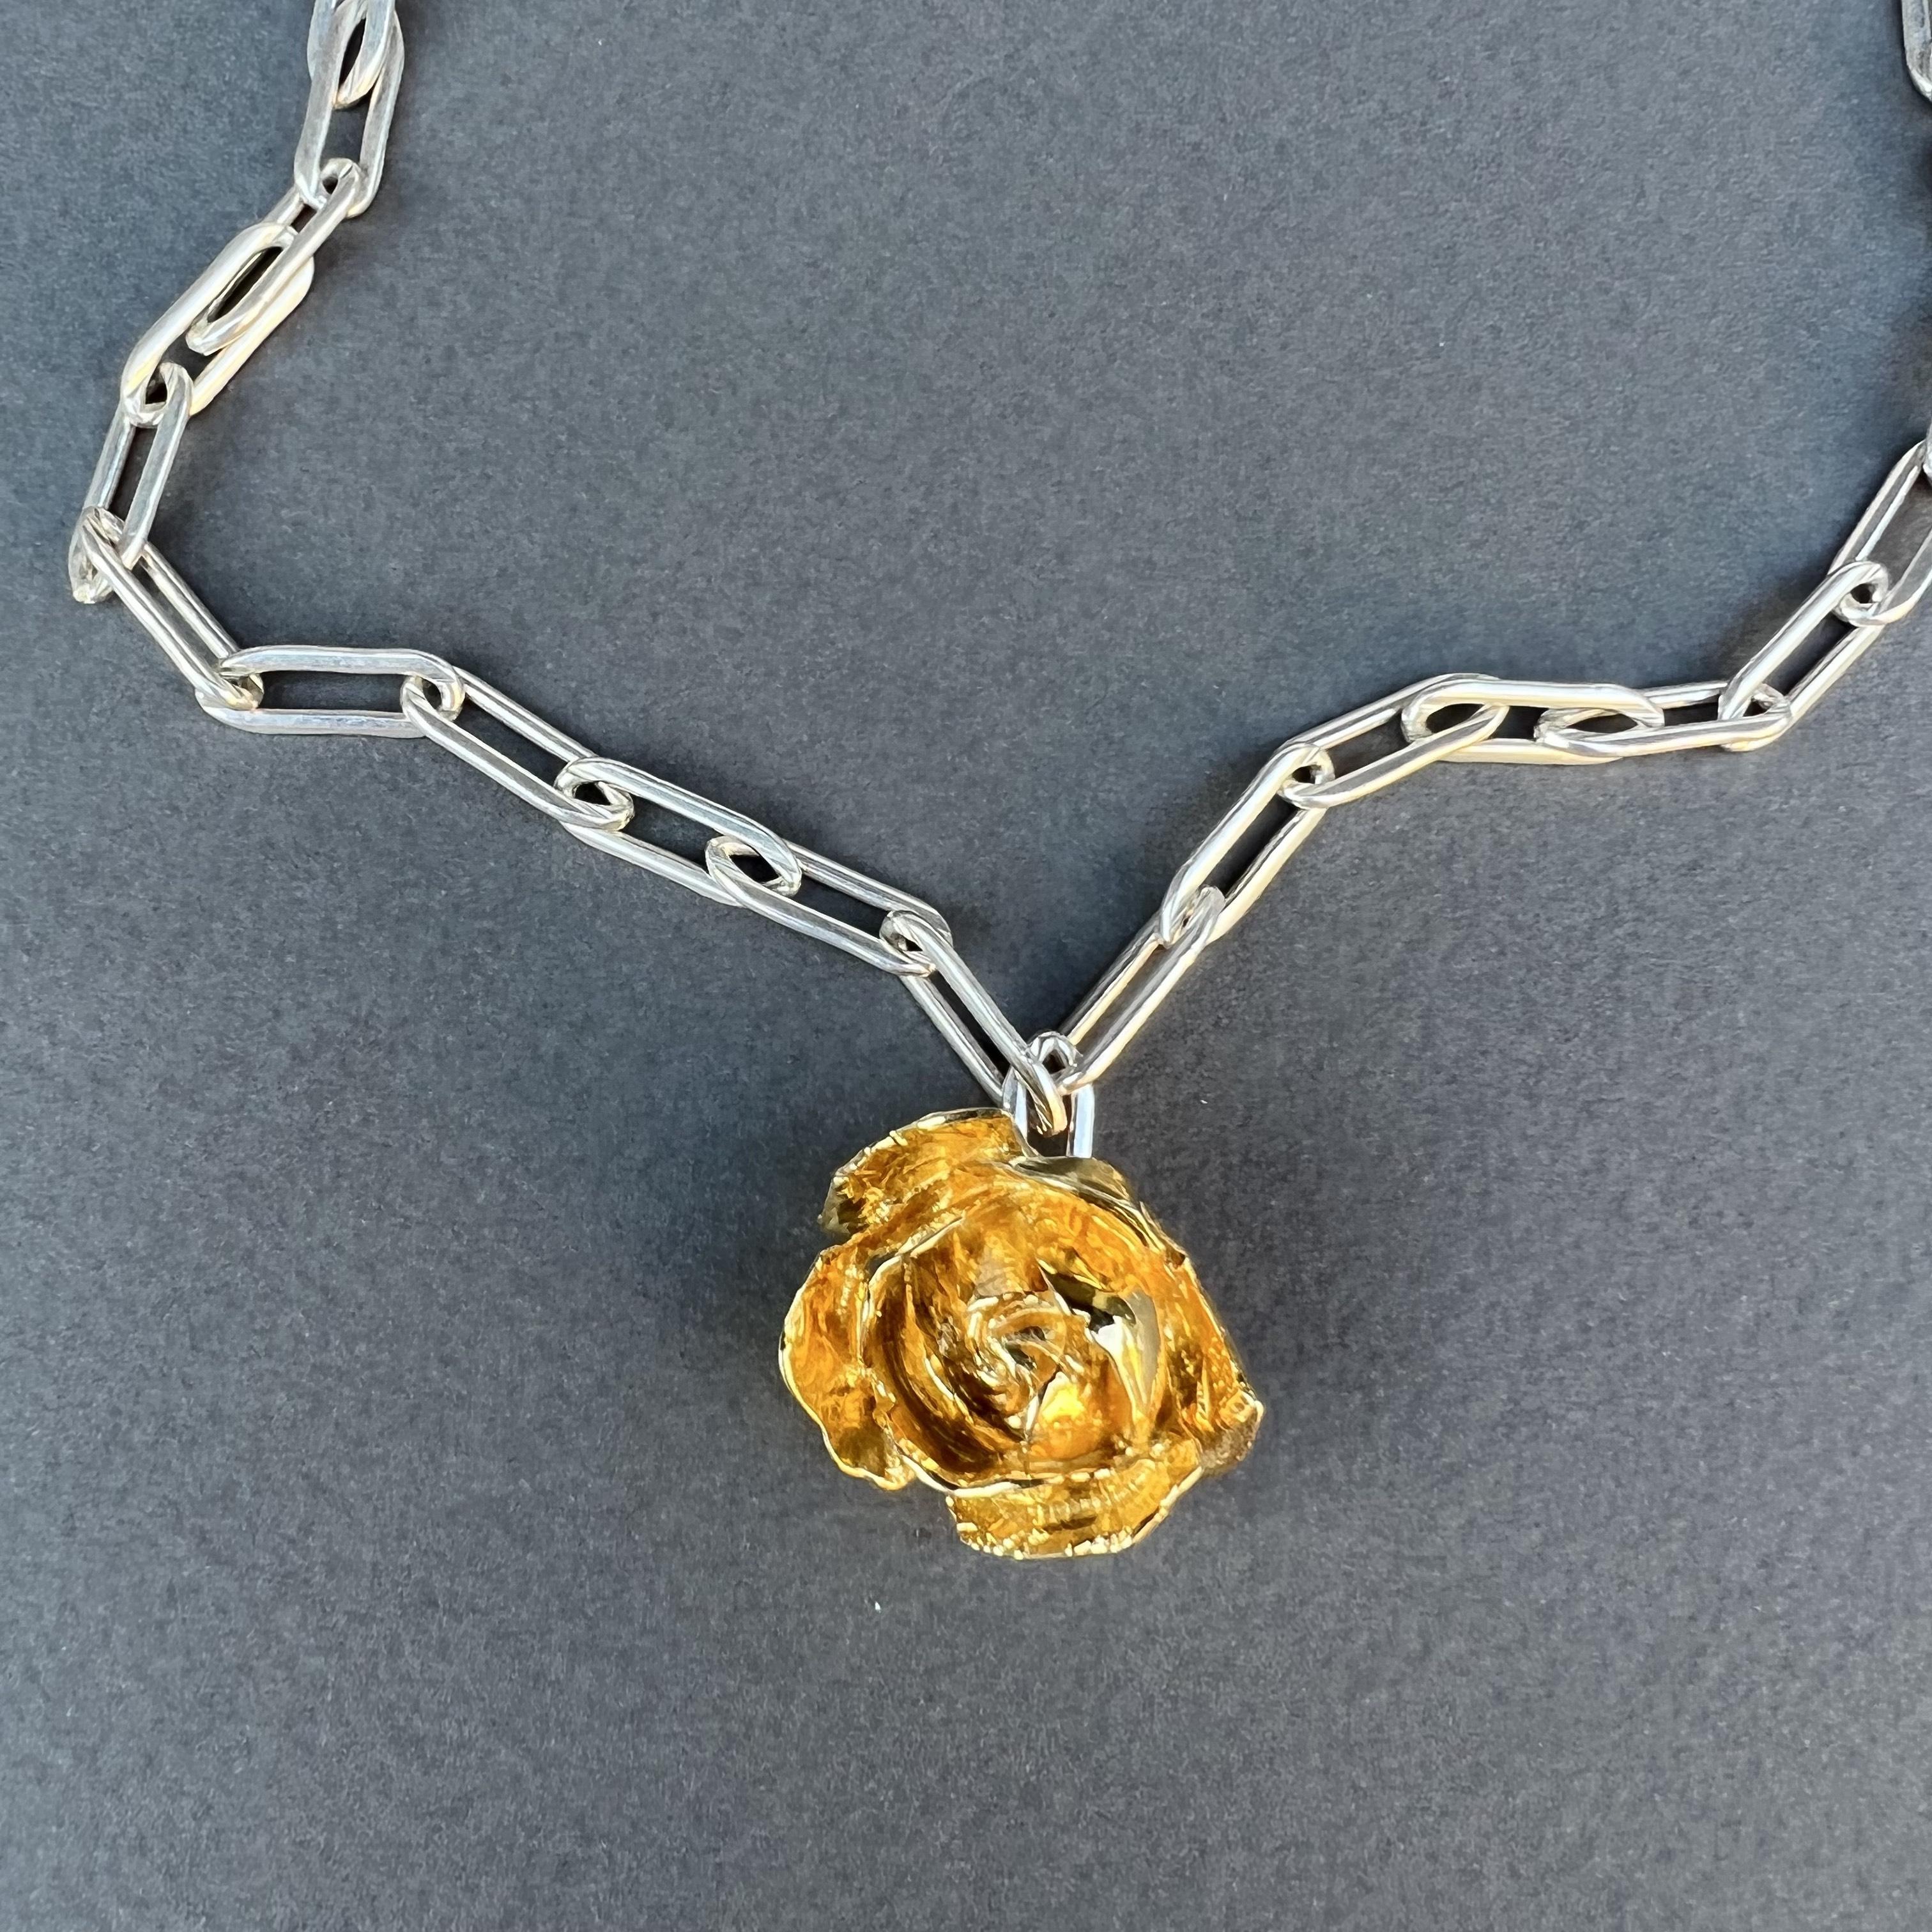 Rose Flower Necklace Love Sterling Silver Chain J Dauphin For Sale 4